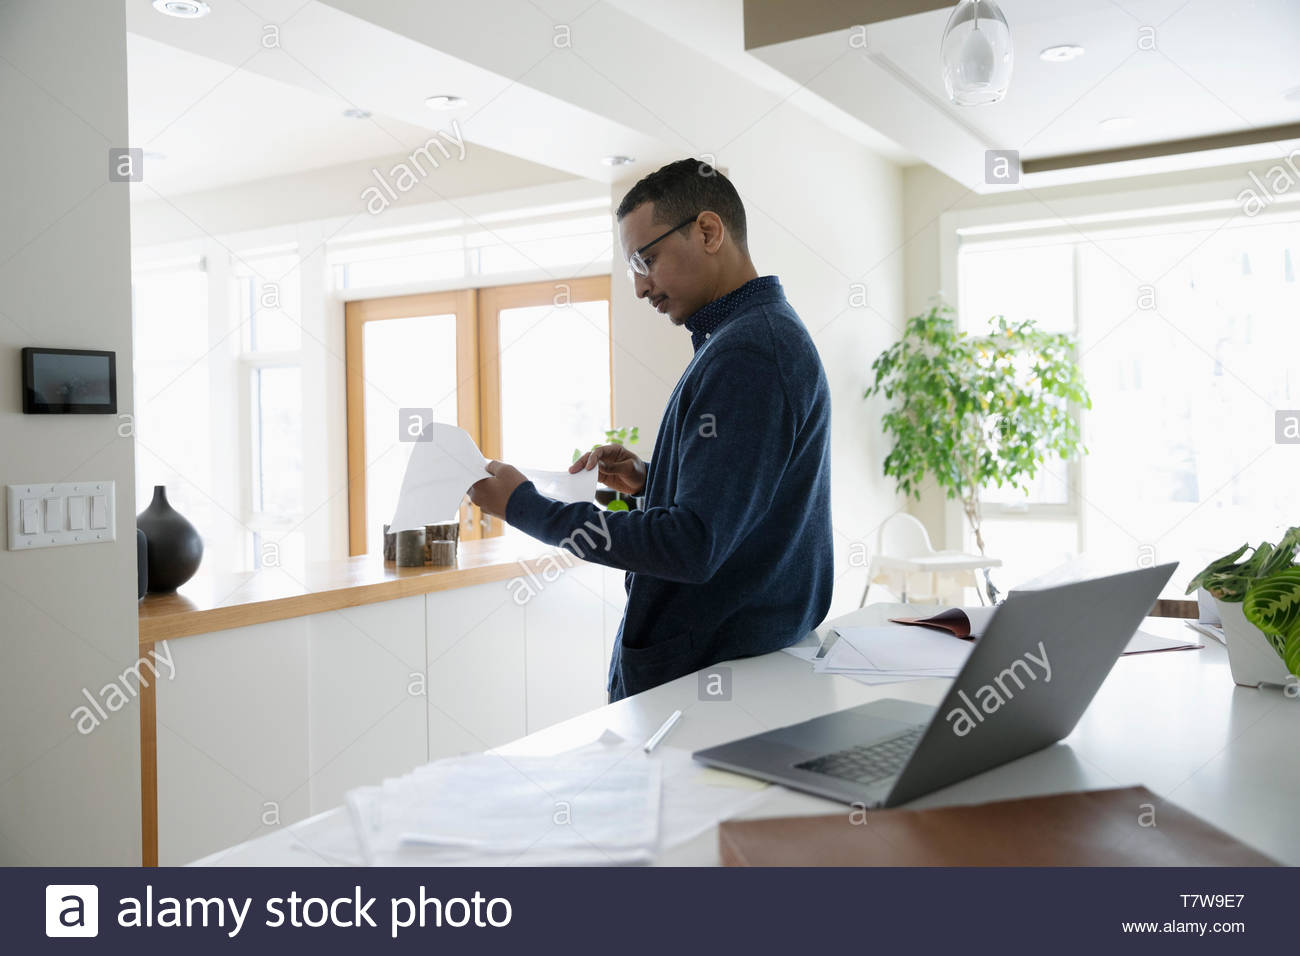 Man working from home, reviewing paperwork in kitchen Stock Photo